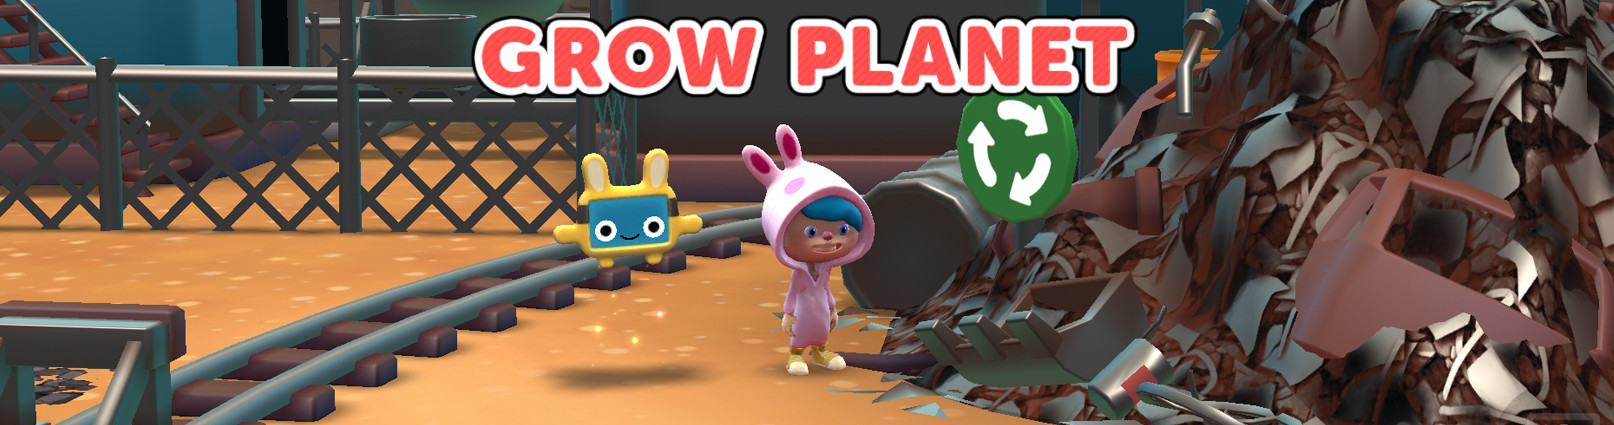 Grow Planet: Game based learning for K-6. STEAM and Sustainable Development